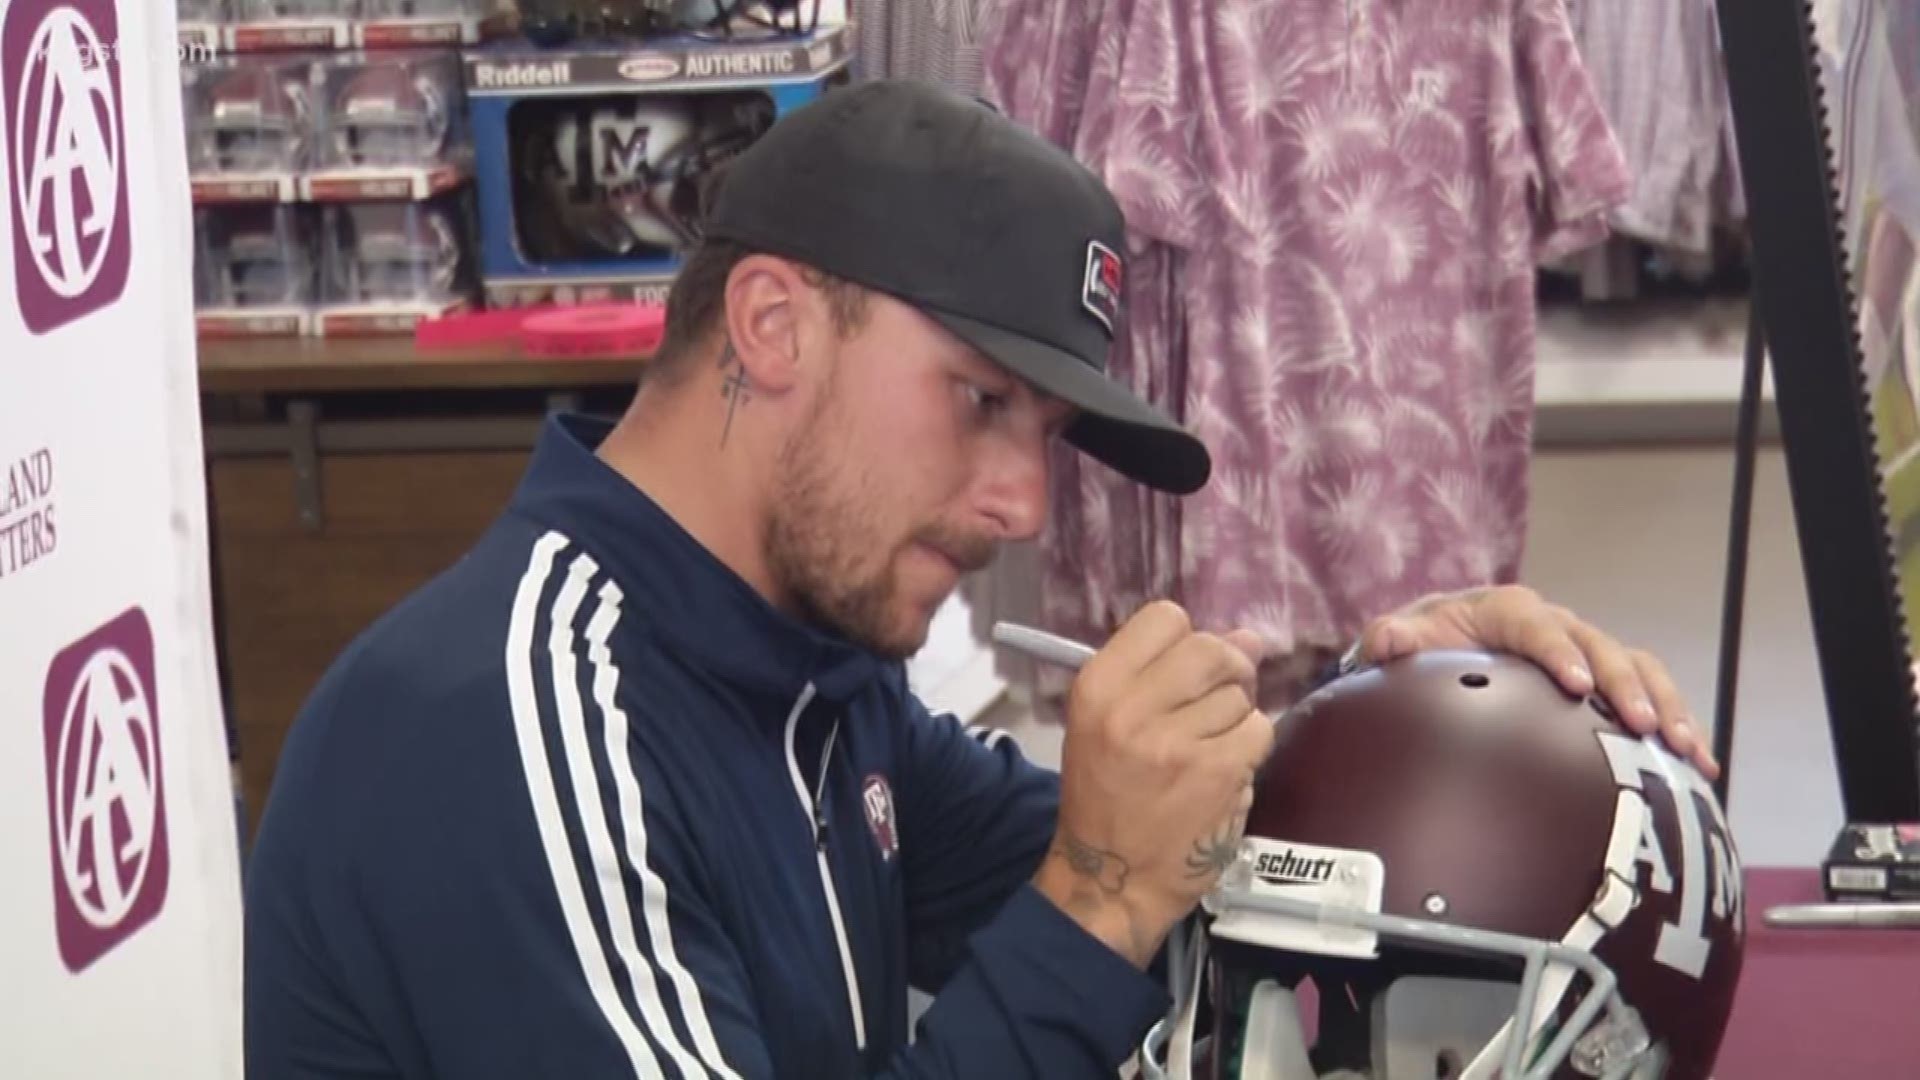 Aggie legend and former Heisman Trophy winner Johnny Manziel was back in College Station on Thursday afternoon.